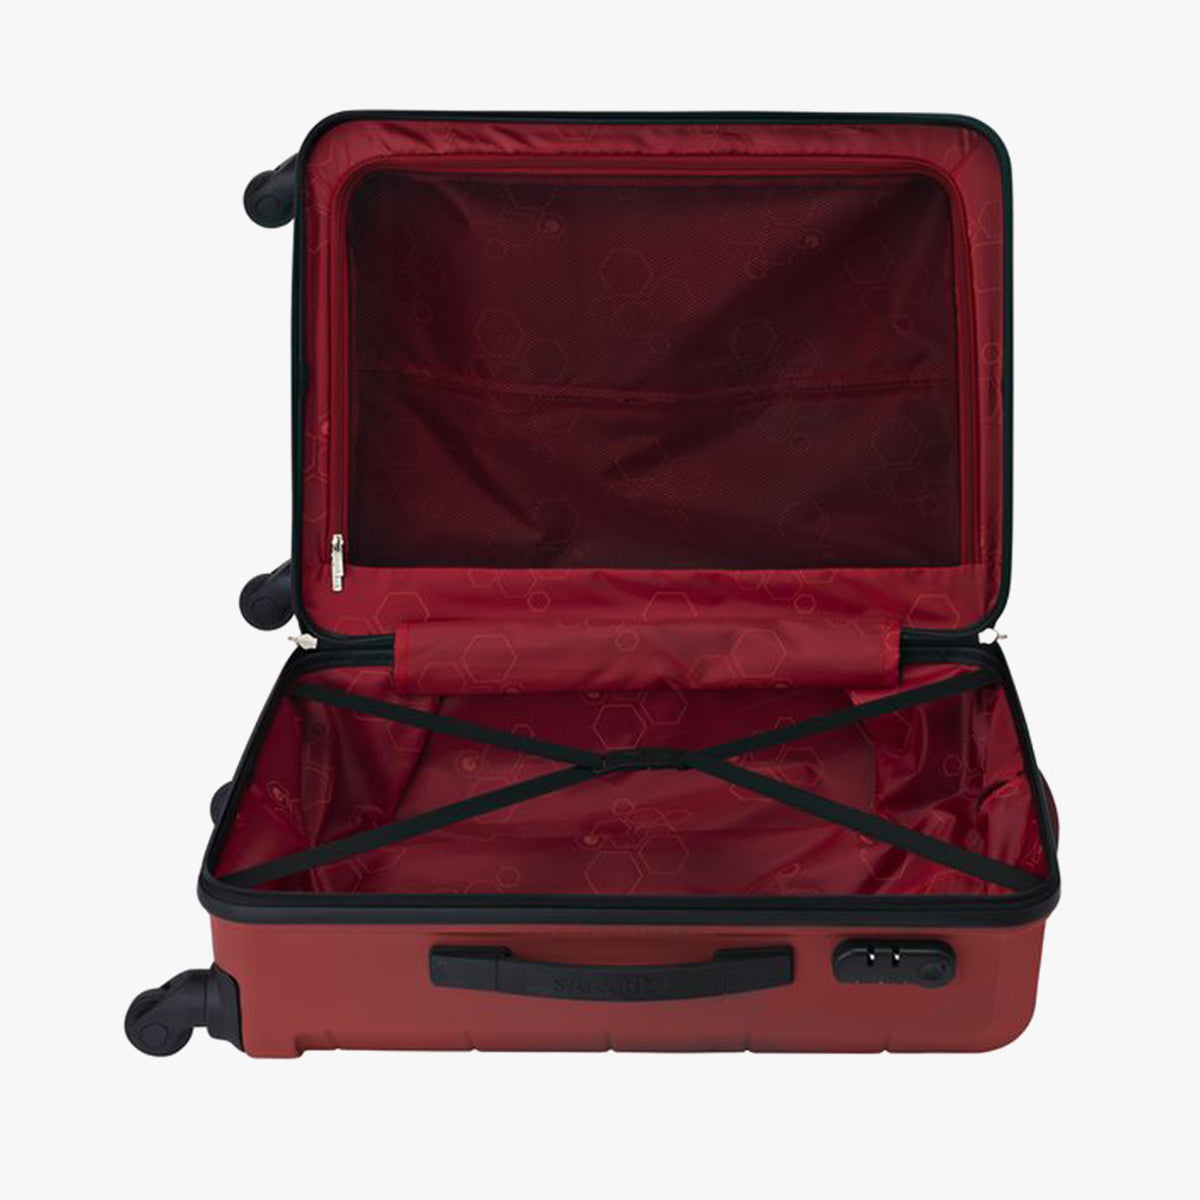 Regloss Antiscratch Hard Luggage Combo Set (Cabin and Medium) - Red